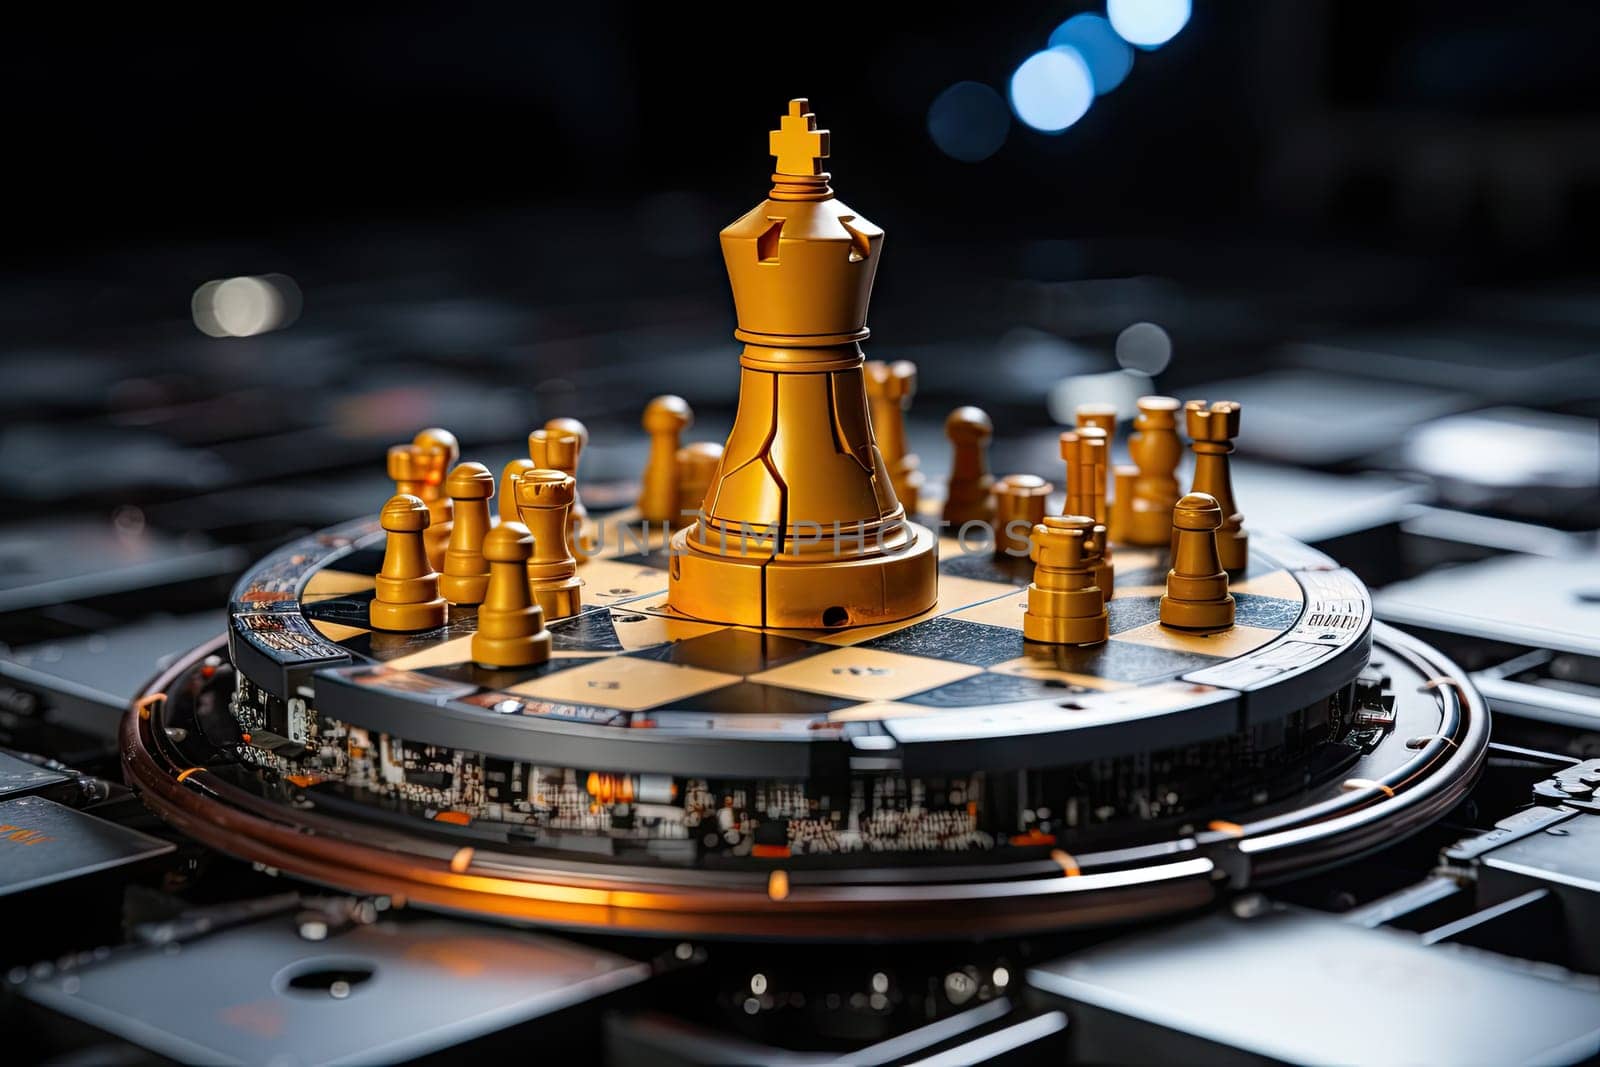 A Regal Battle of Strategy and Tactics: The Golden Chess Set on a Classic Black and White Chess Board